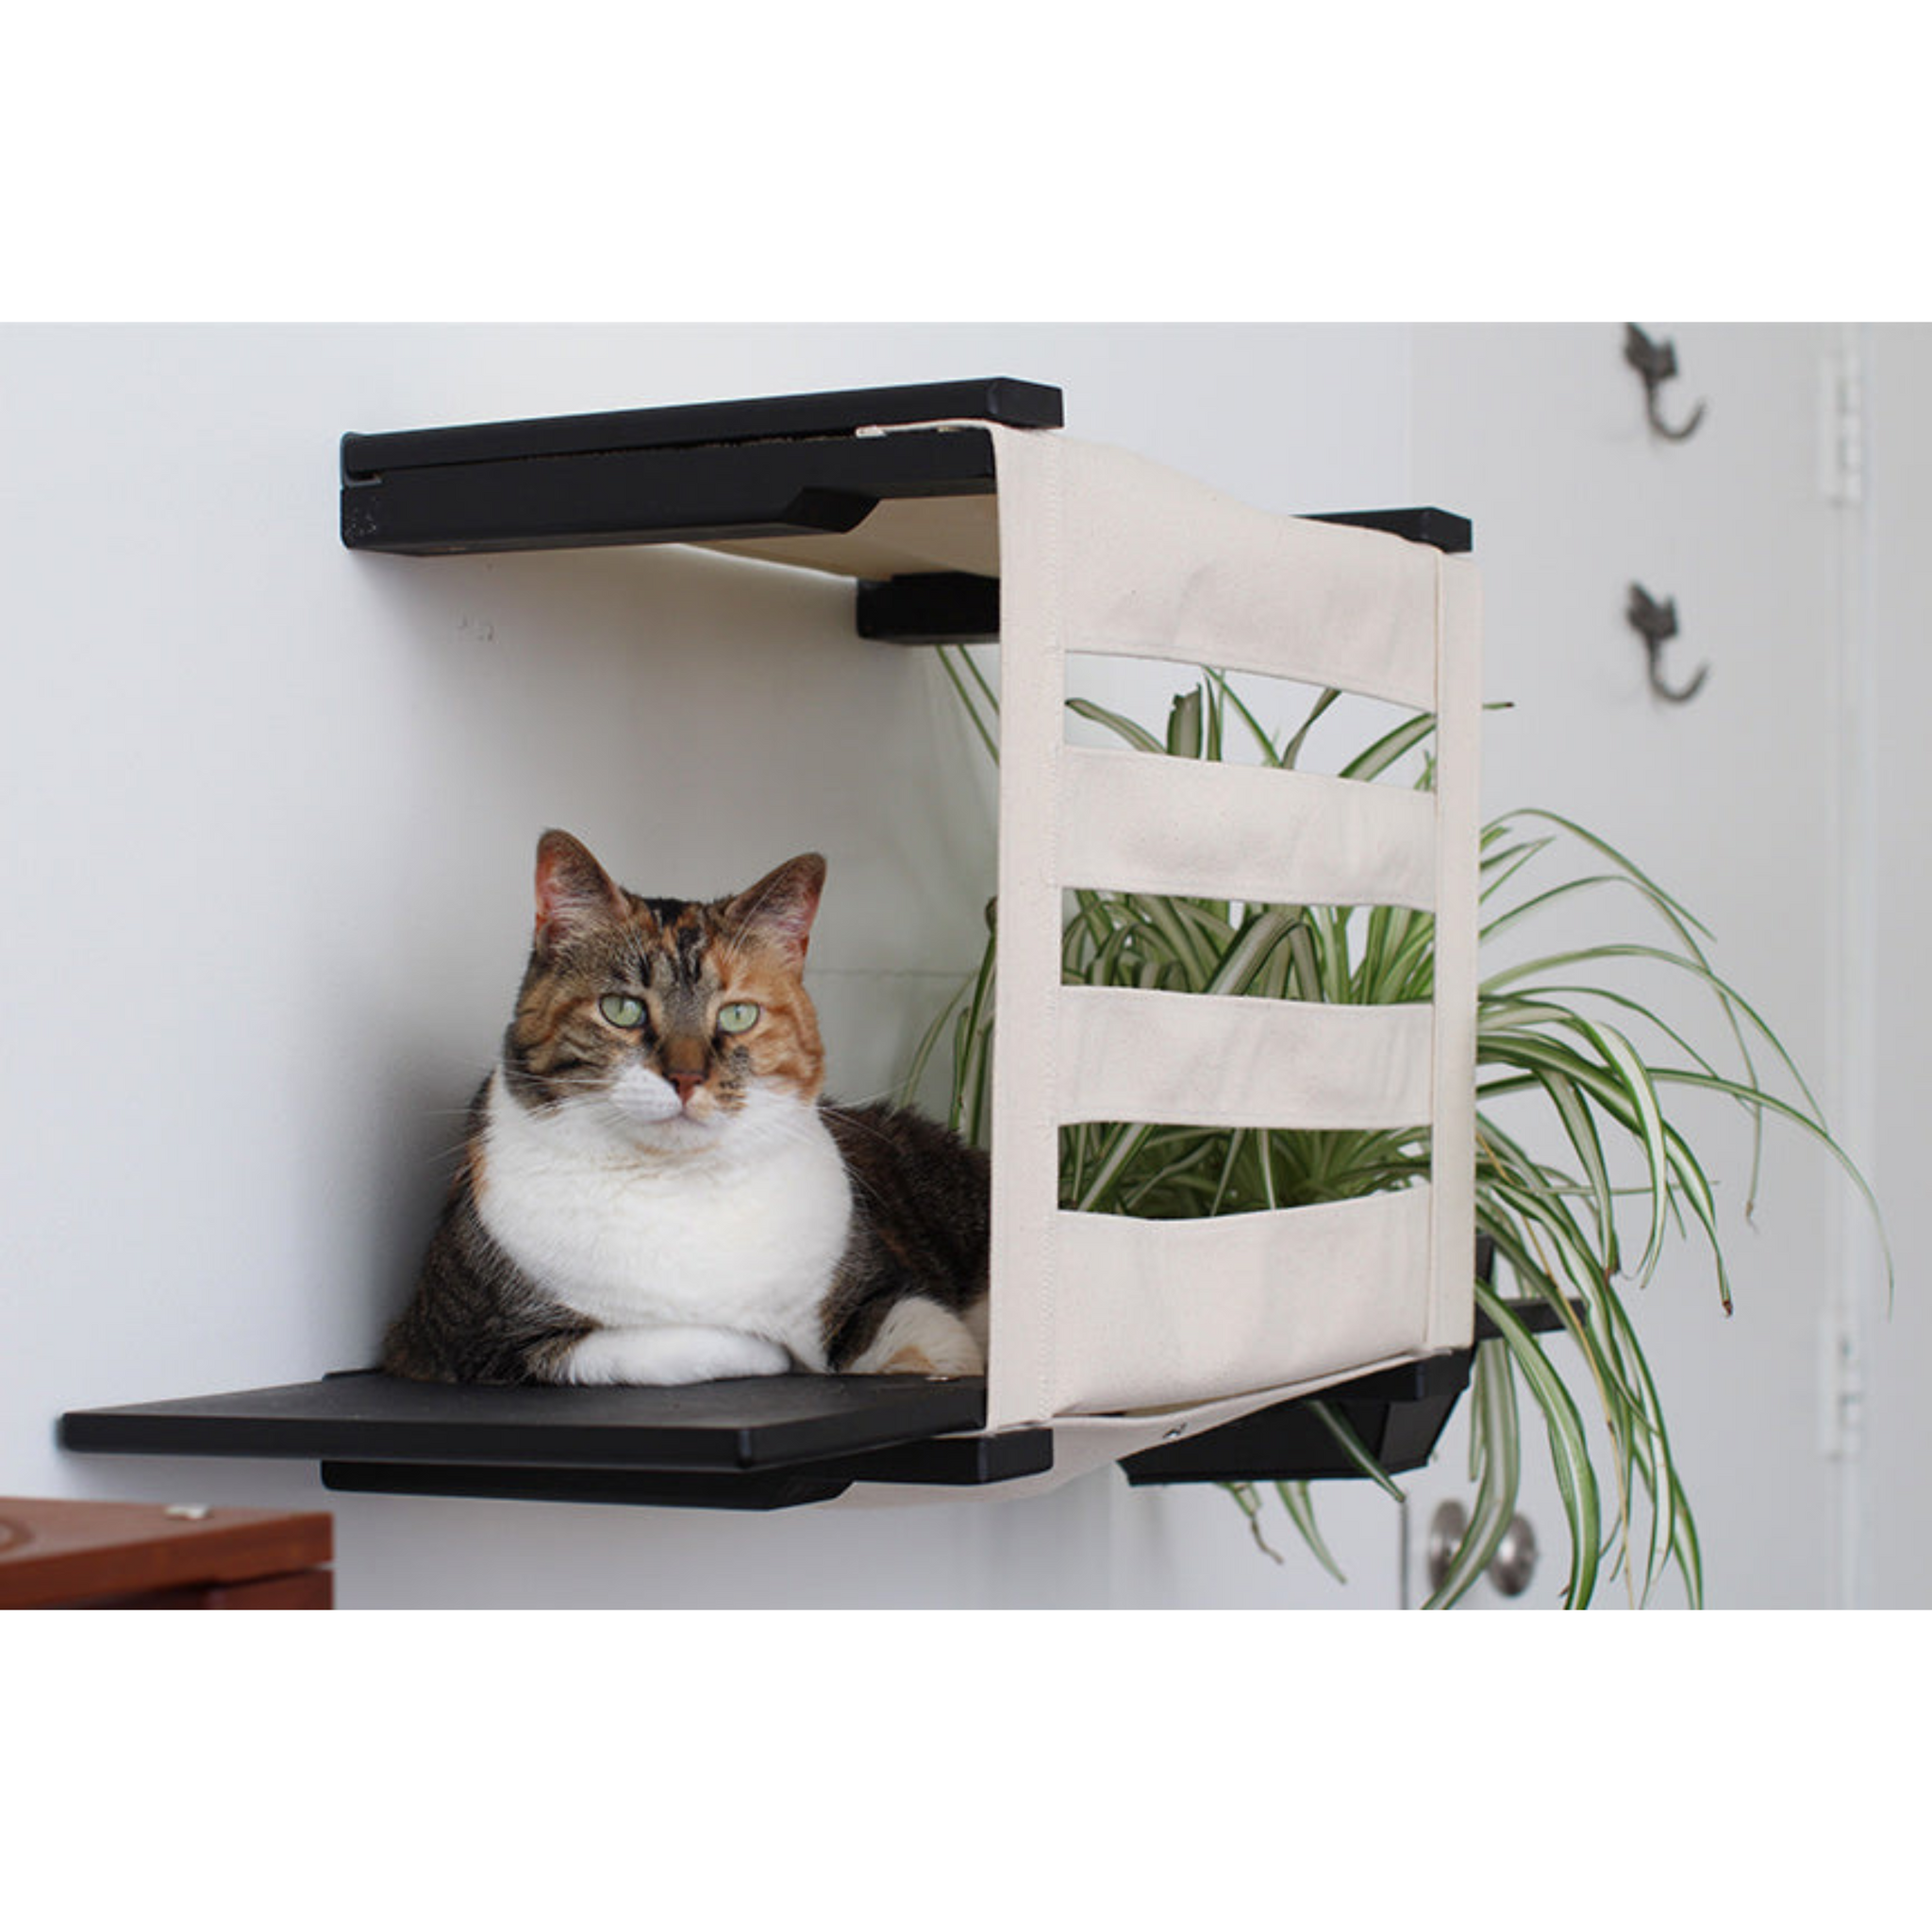 Deluxe Cat Cubby Bed (For Walls) by Catastrophic Creations